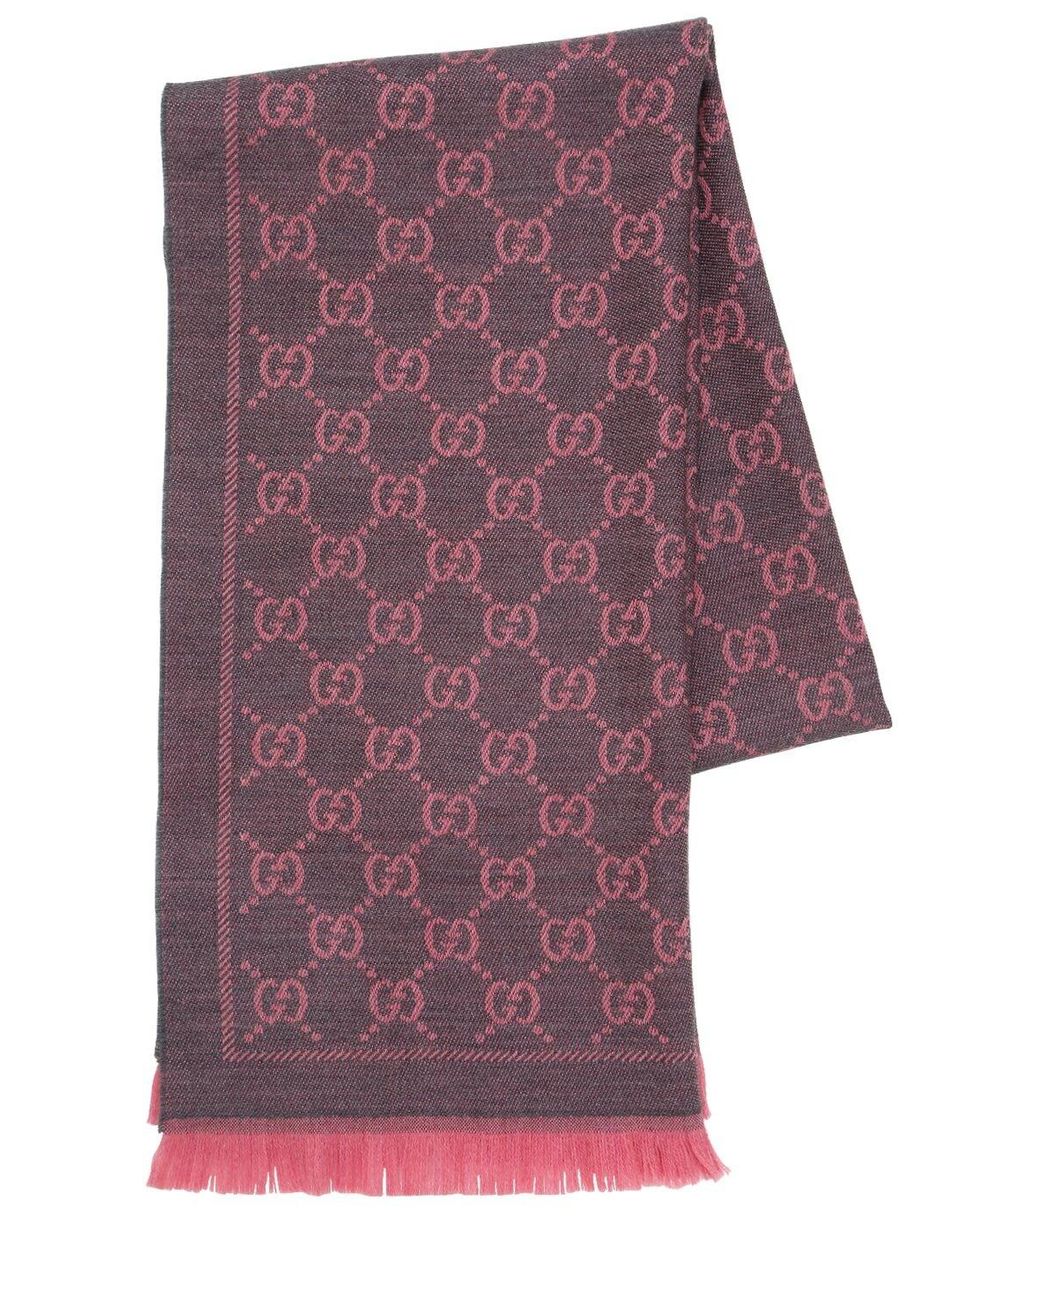 Gucci Gg Jacquard Wool Scarf in Pink/Grey (Pink) - Save 8% - Lyst